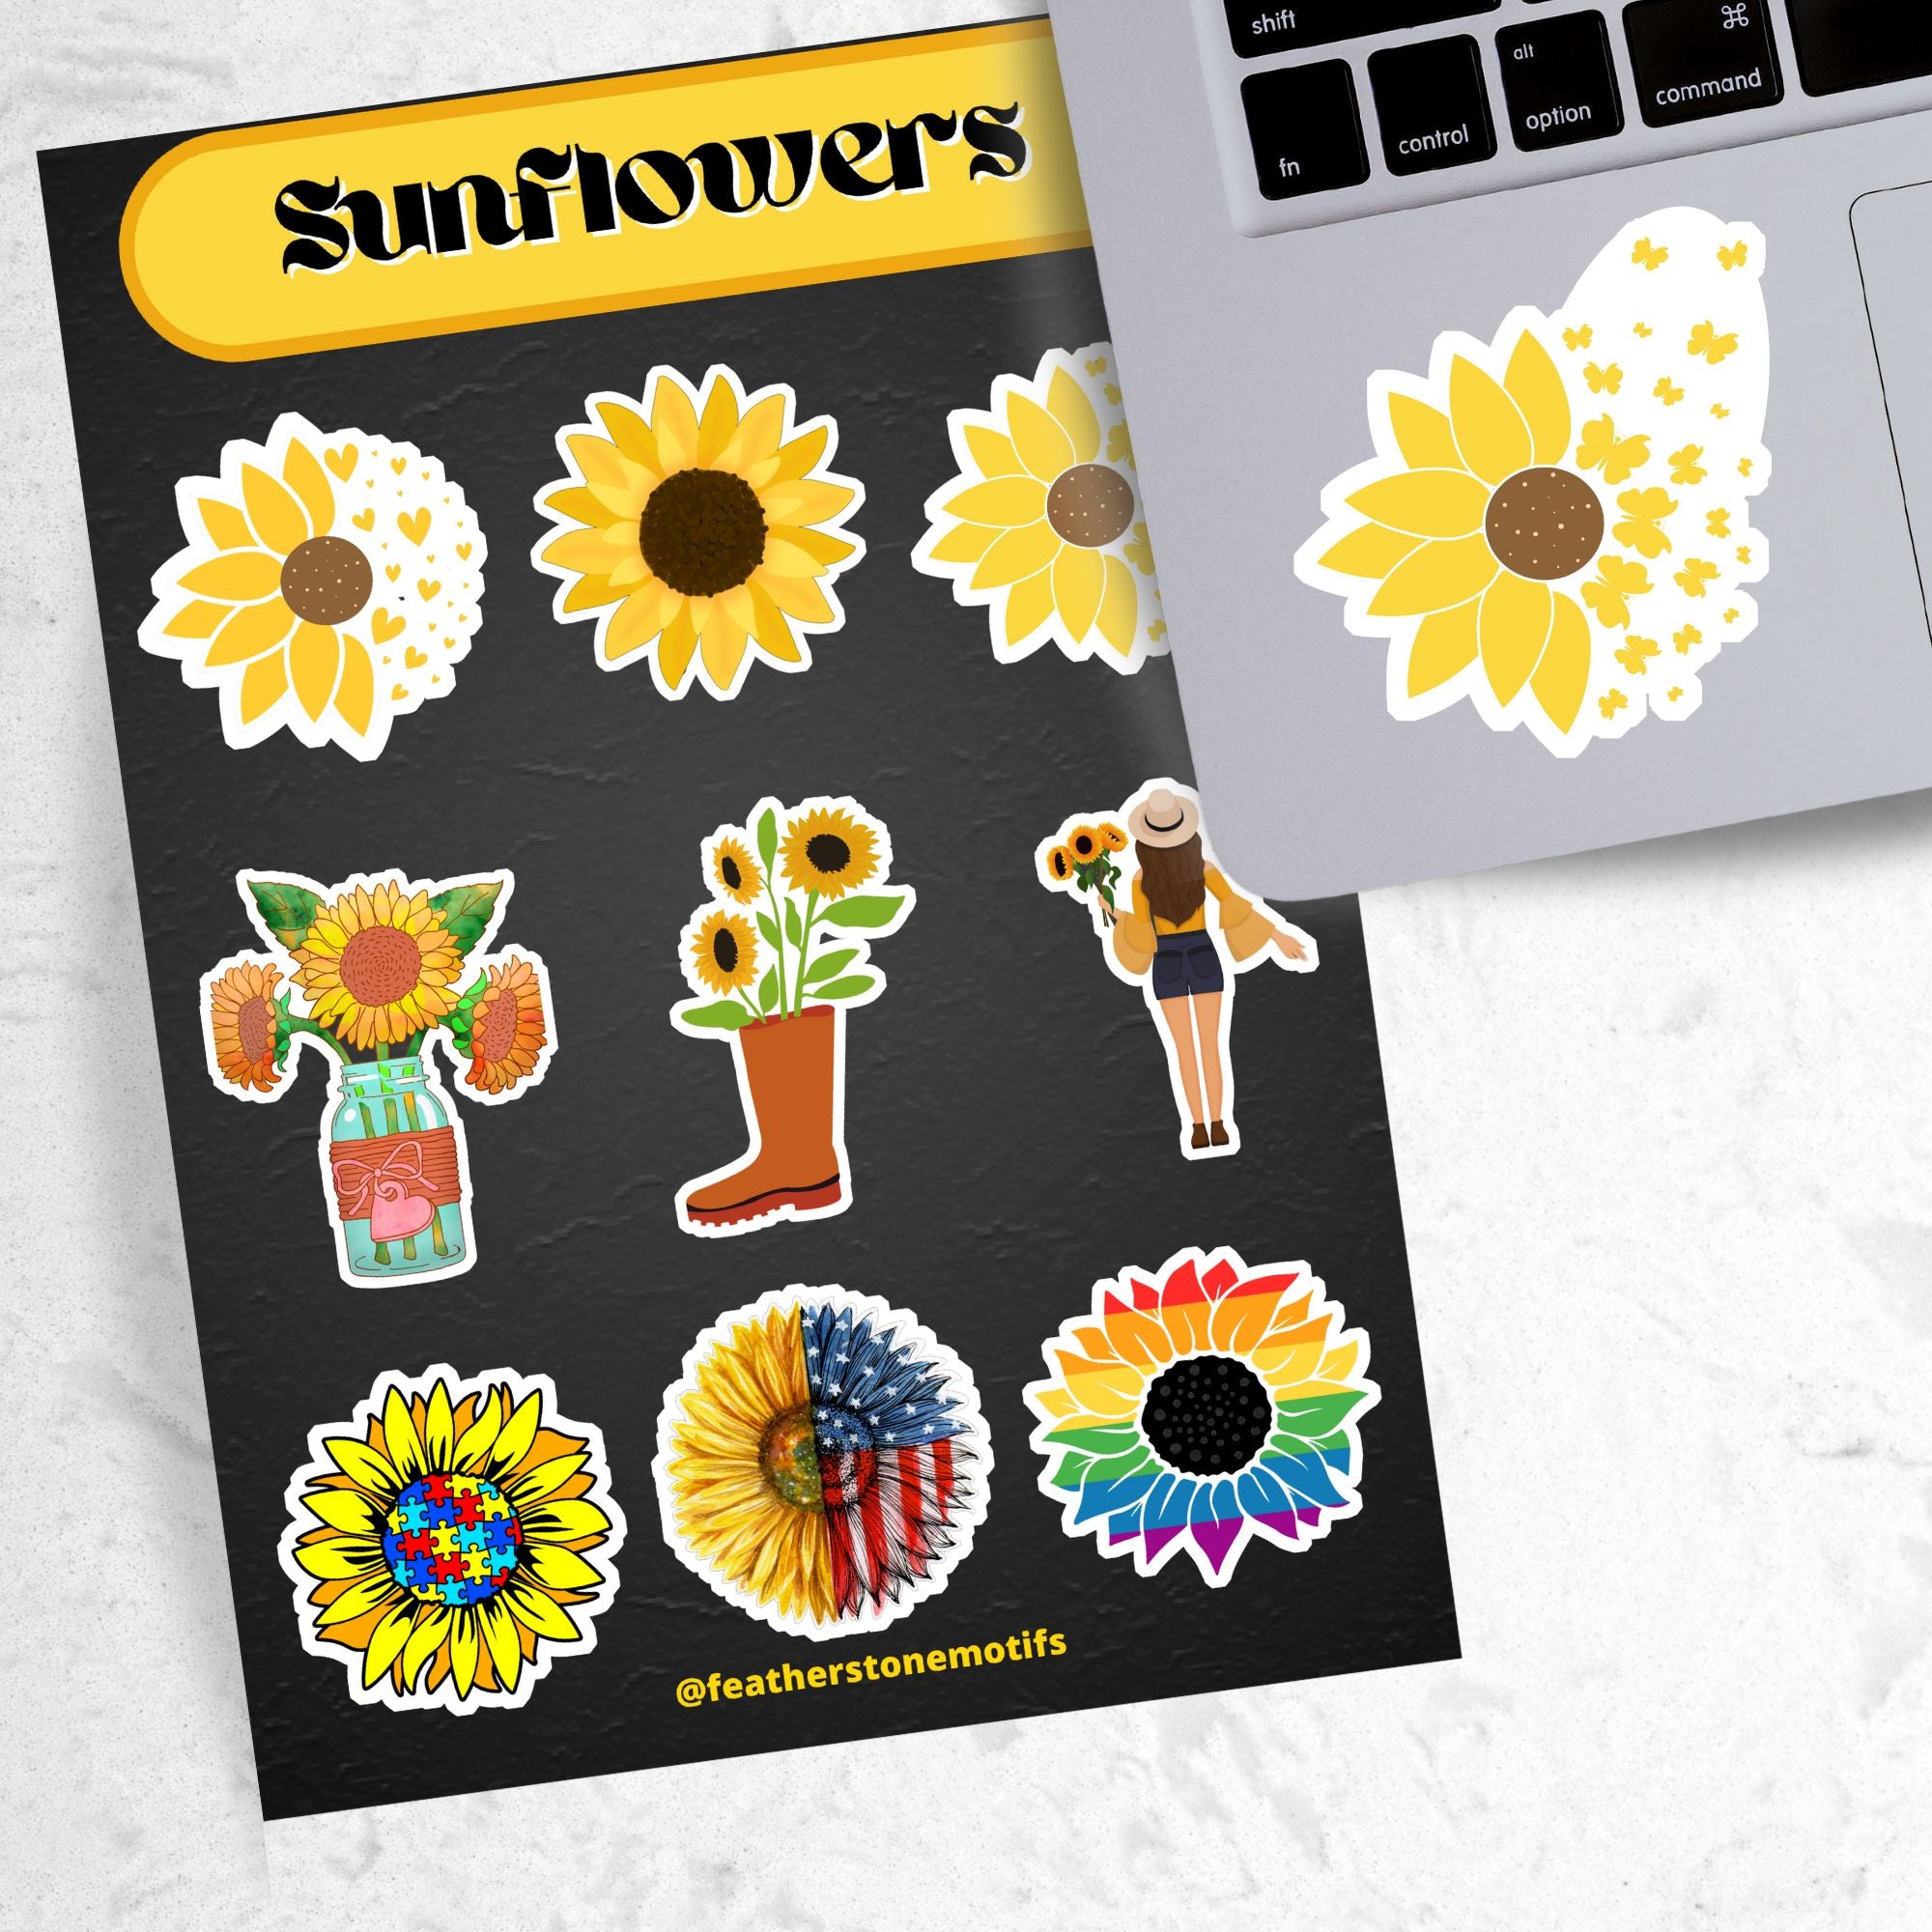 Love sunflowers? Then show it with this sticker sheet! This sticker sheet has nine larger sunflower images. This image shows the sticker sheet next to an open laptop with a sticker of a sunflower morphing into butterflies applied below the keyboard.